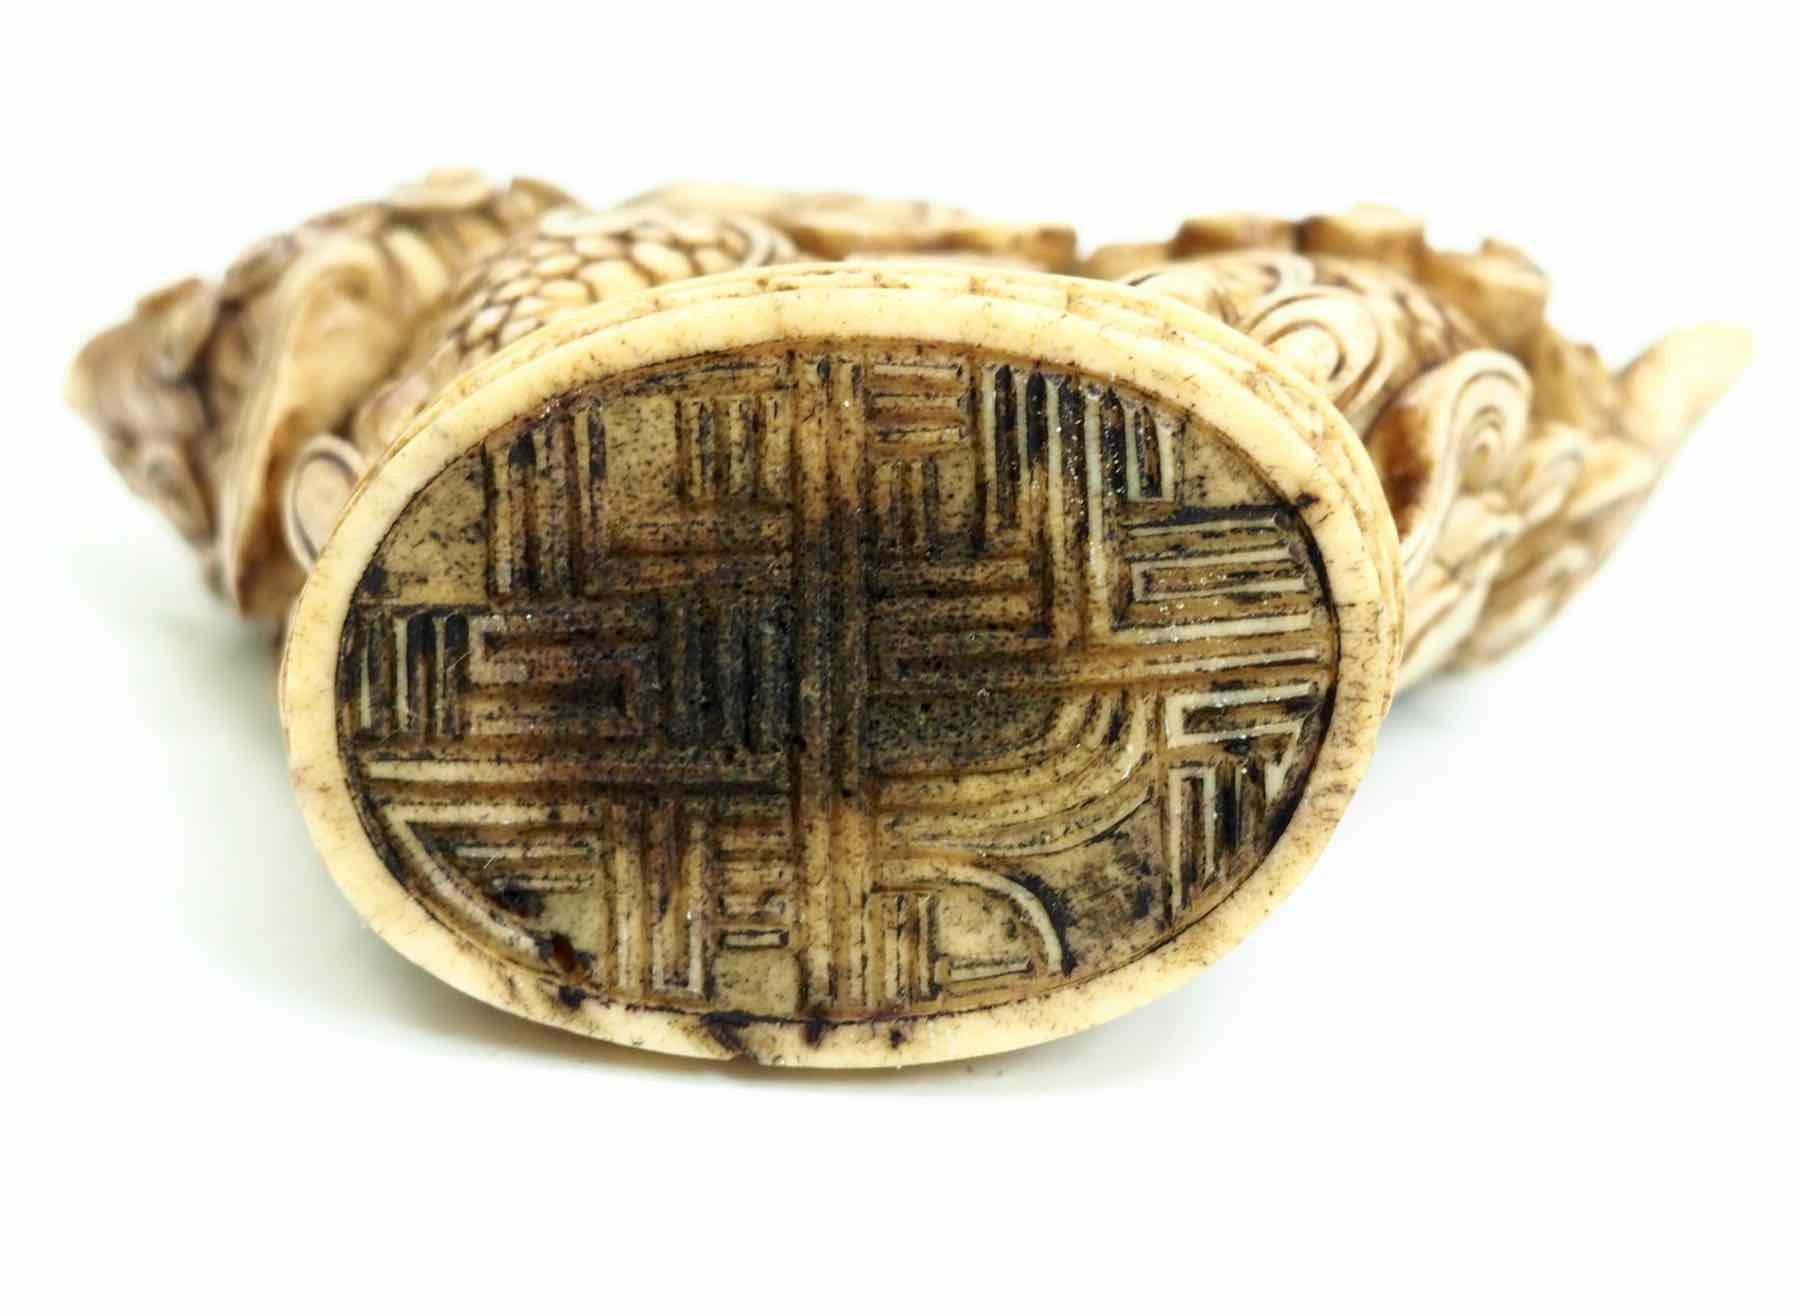 Chinese bone stamp, 18th-19th century
Measures: H. 7 W. 10 cm 
H. 2.7 W. 3.9 in.